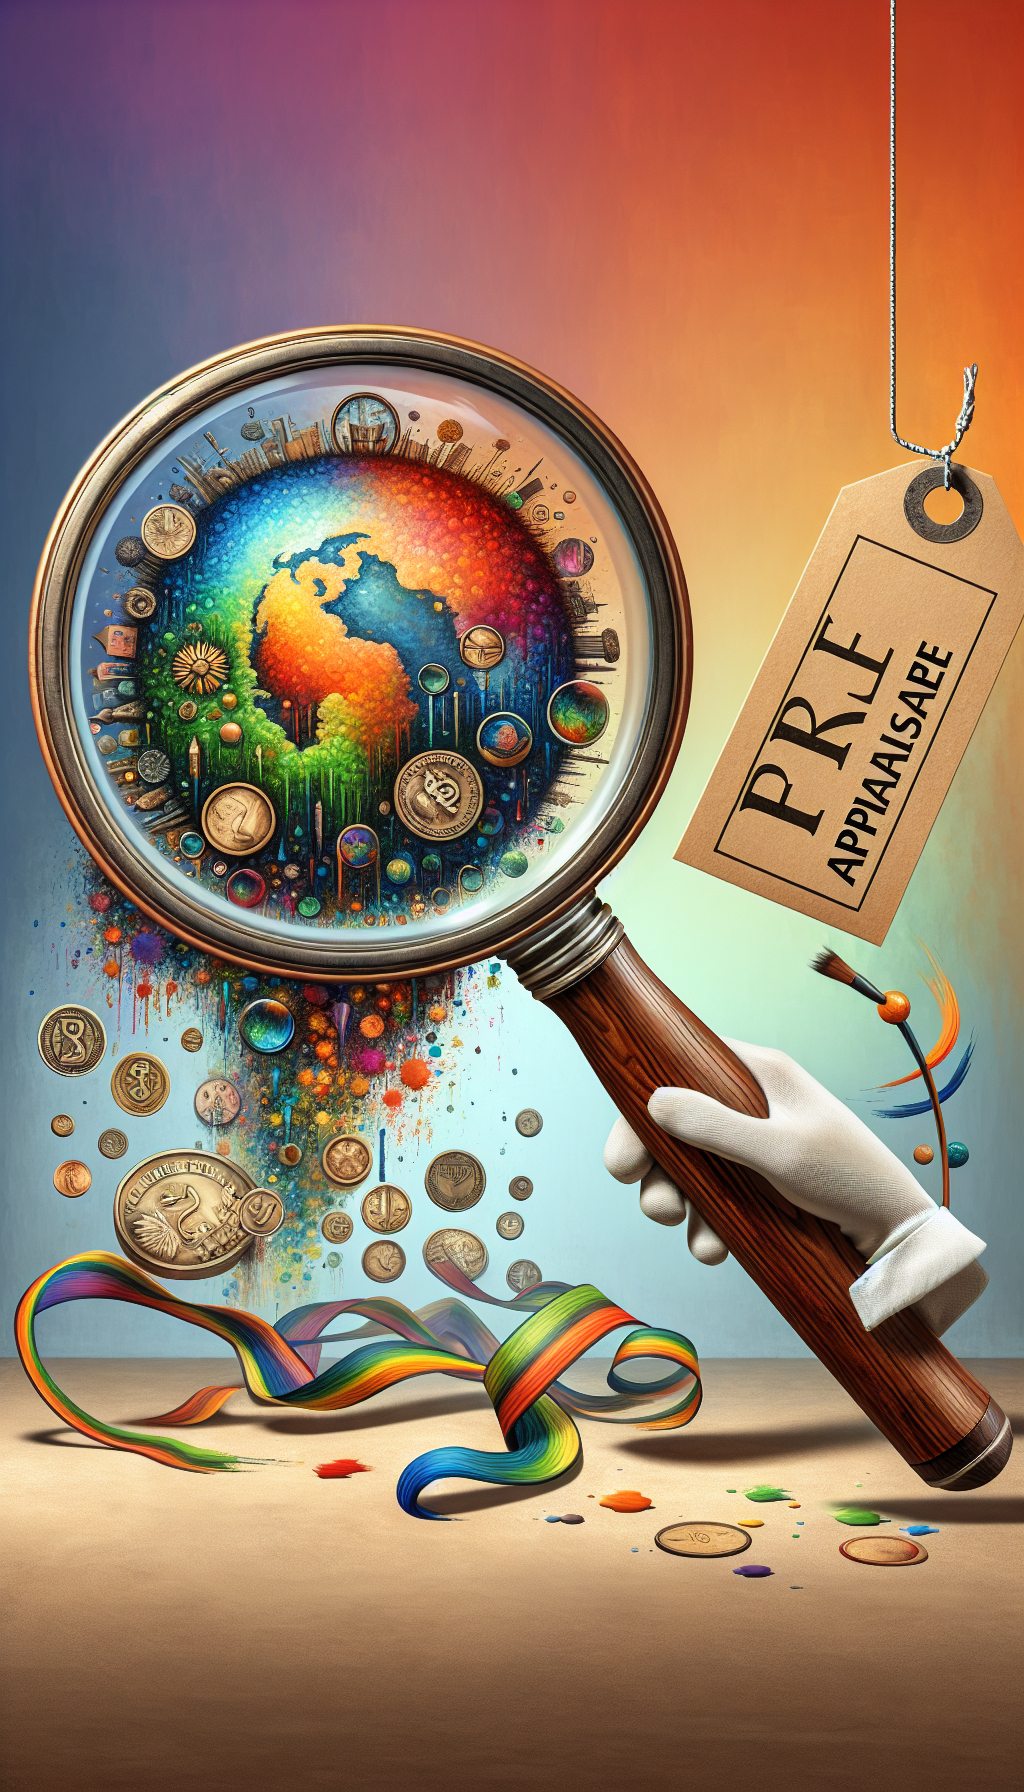 An illustration of a magnifying glass hovering over a vibrant canvas, revealing various underlying aspects such as texture, color depth, and composition, with shining coins and price tags within the details, symbolizing value assessment. Beside the canvas, a price tag dangles with "Free Appraisal" written in bold, while diverse brush strokes and a free-flowing ribbon frame the entire image, encompassing eclecticism.